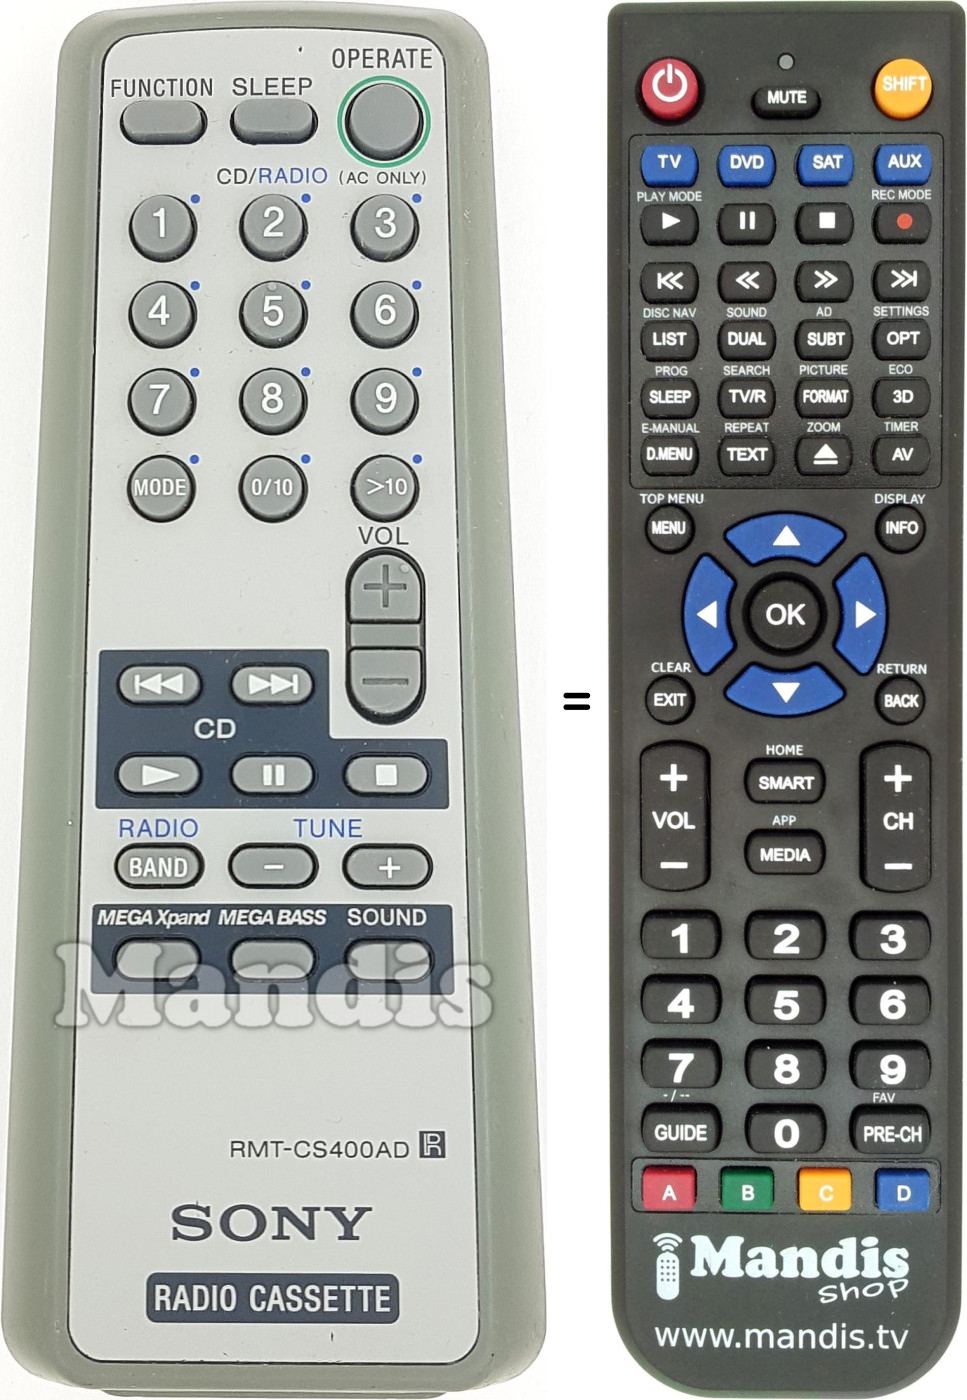 Replacement remote control RMT-CS400AD